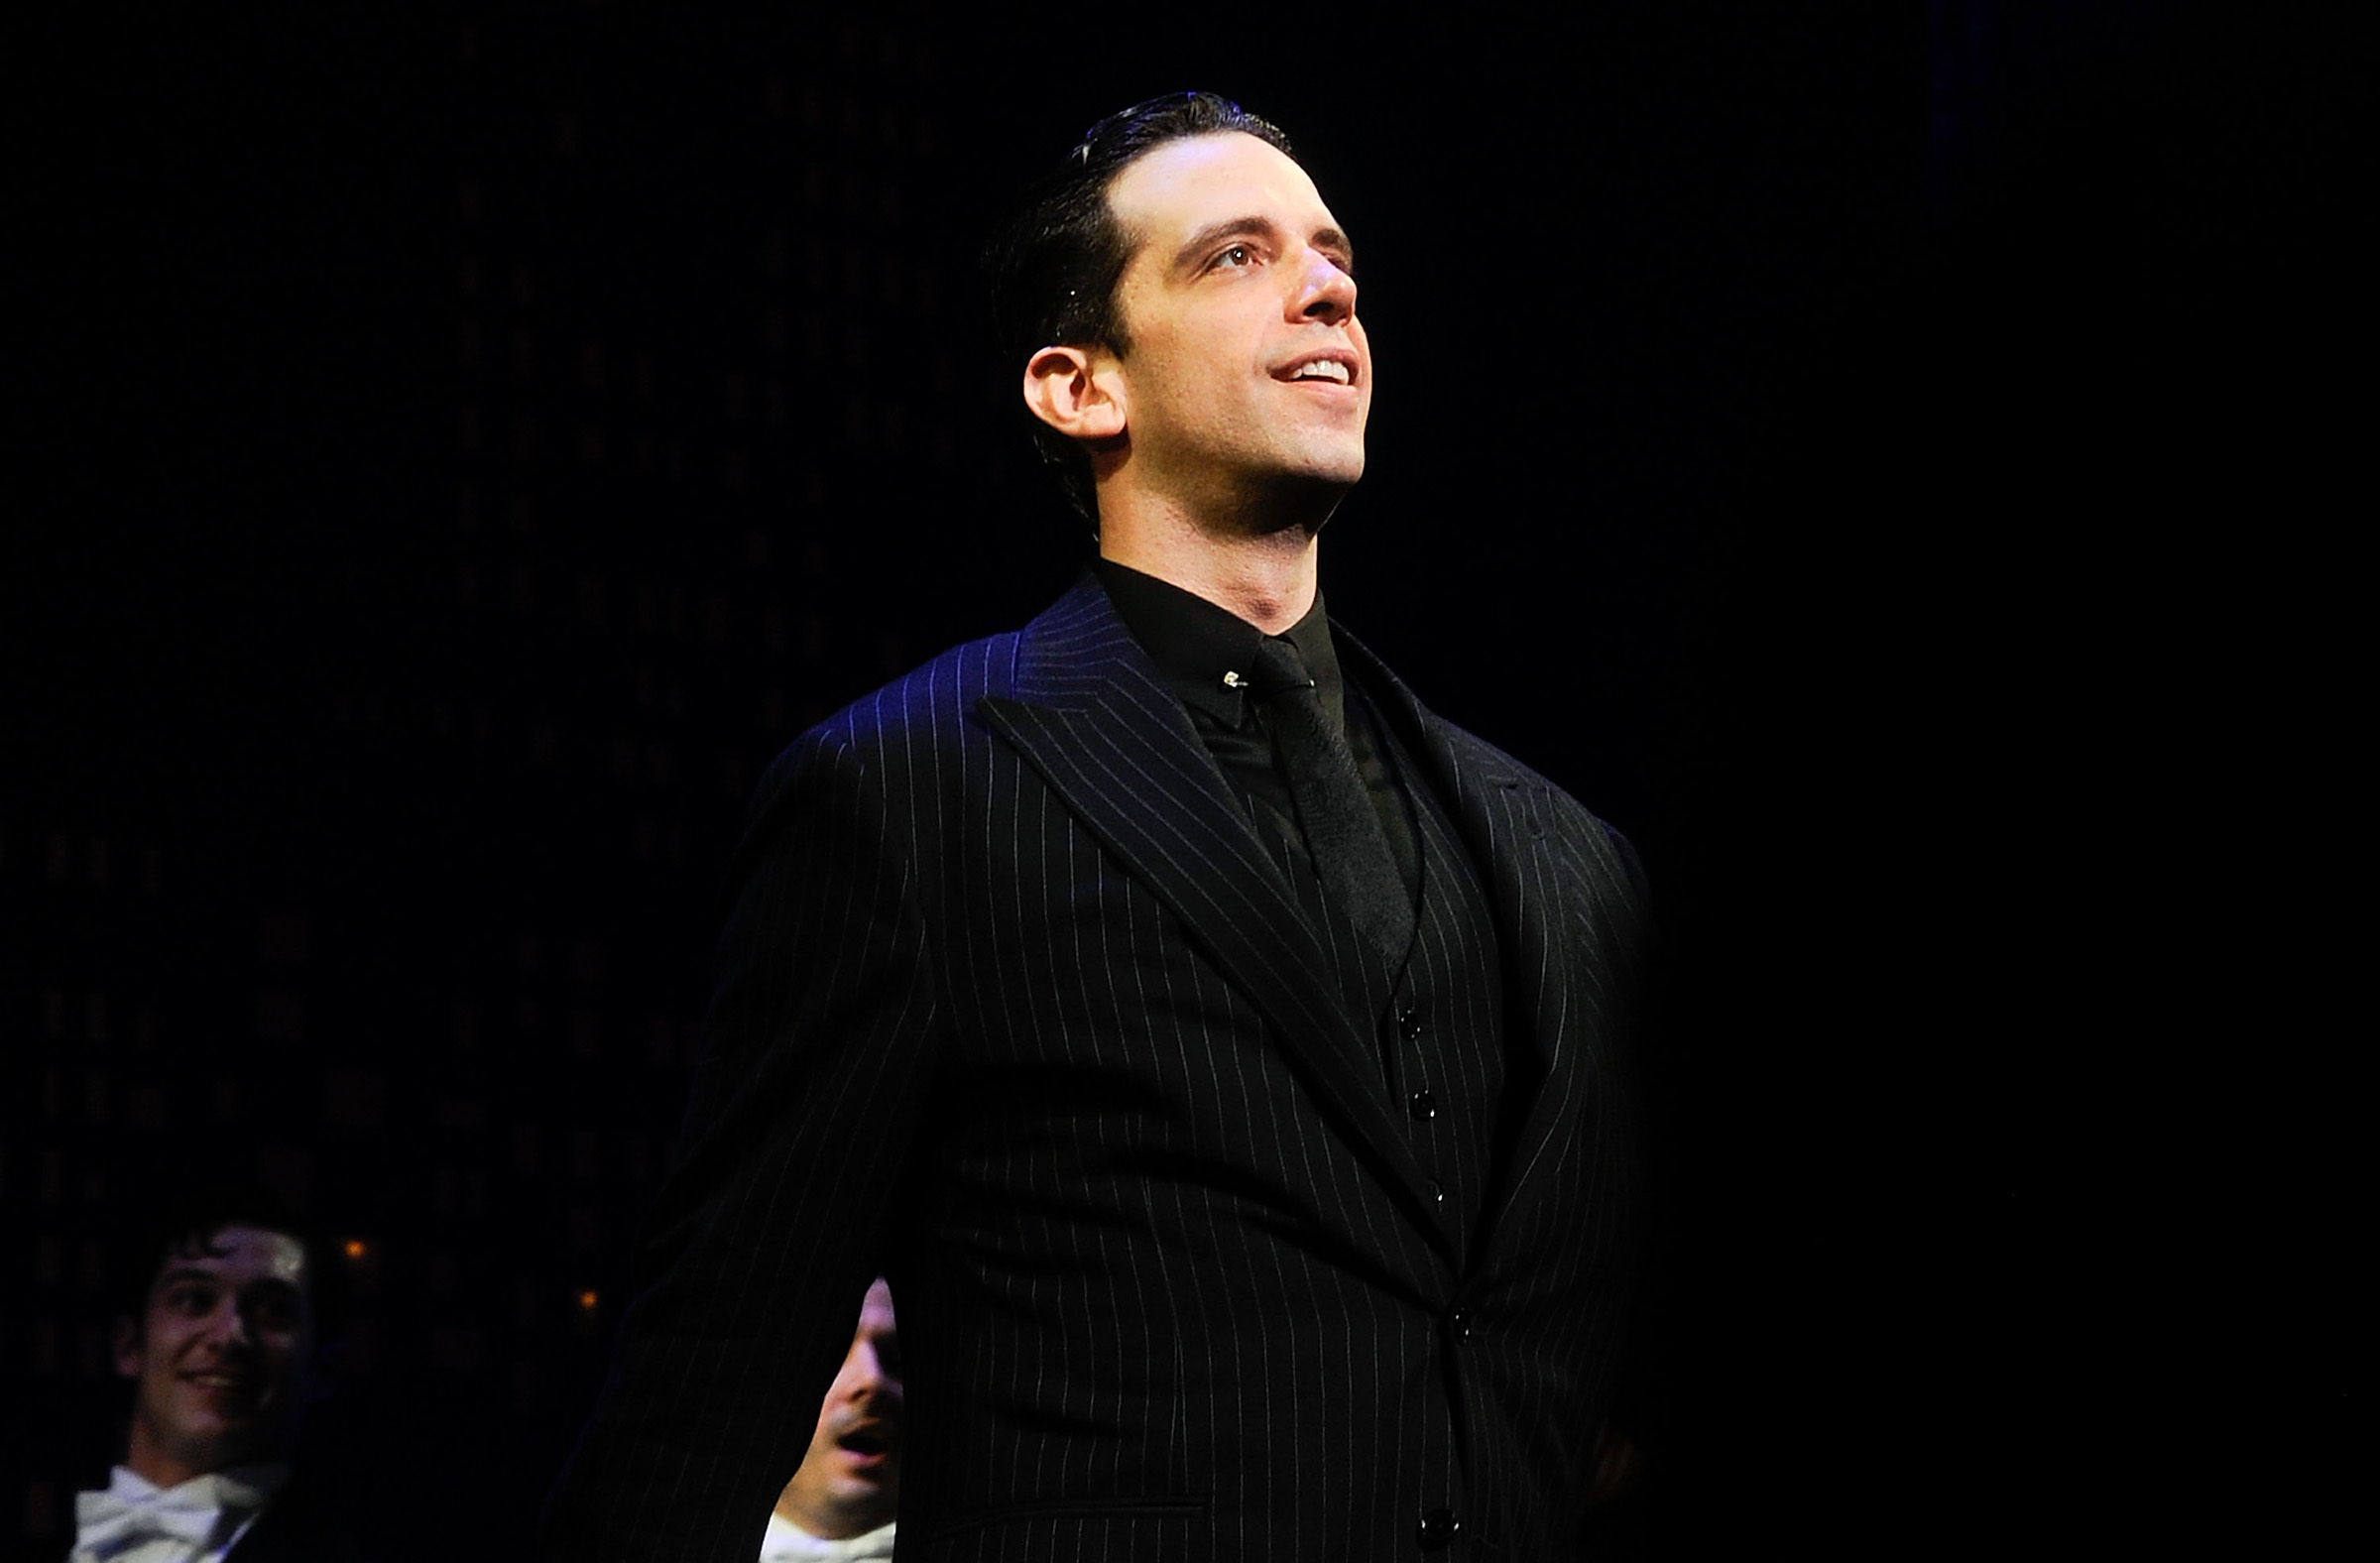 Nick Cordero performs during the "Bullets Over Broadway" opening night curtain call at St. James Theatre on April 10, 2014 in New York City. (Daniel Zuchnik/WireImage)